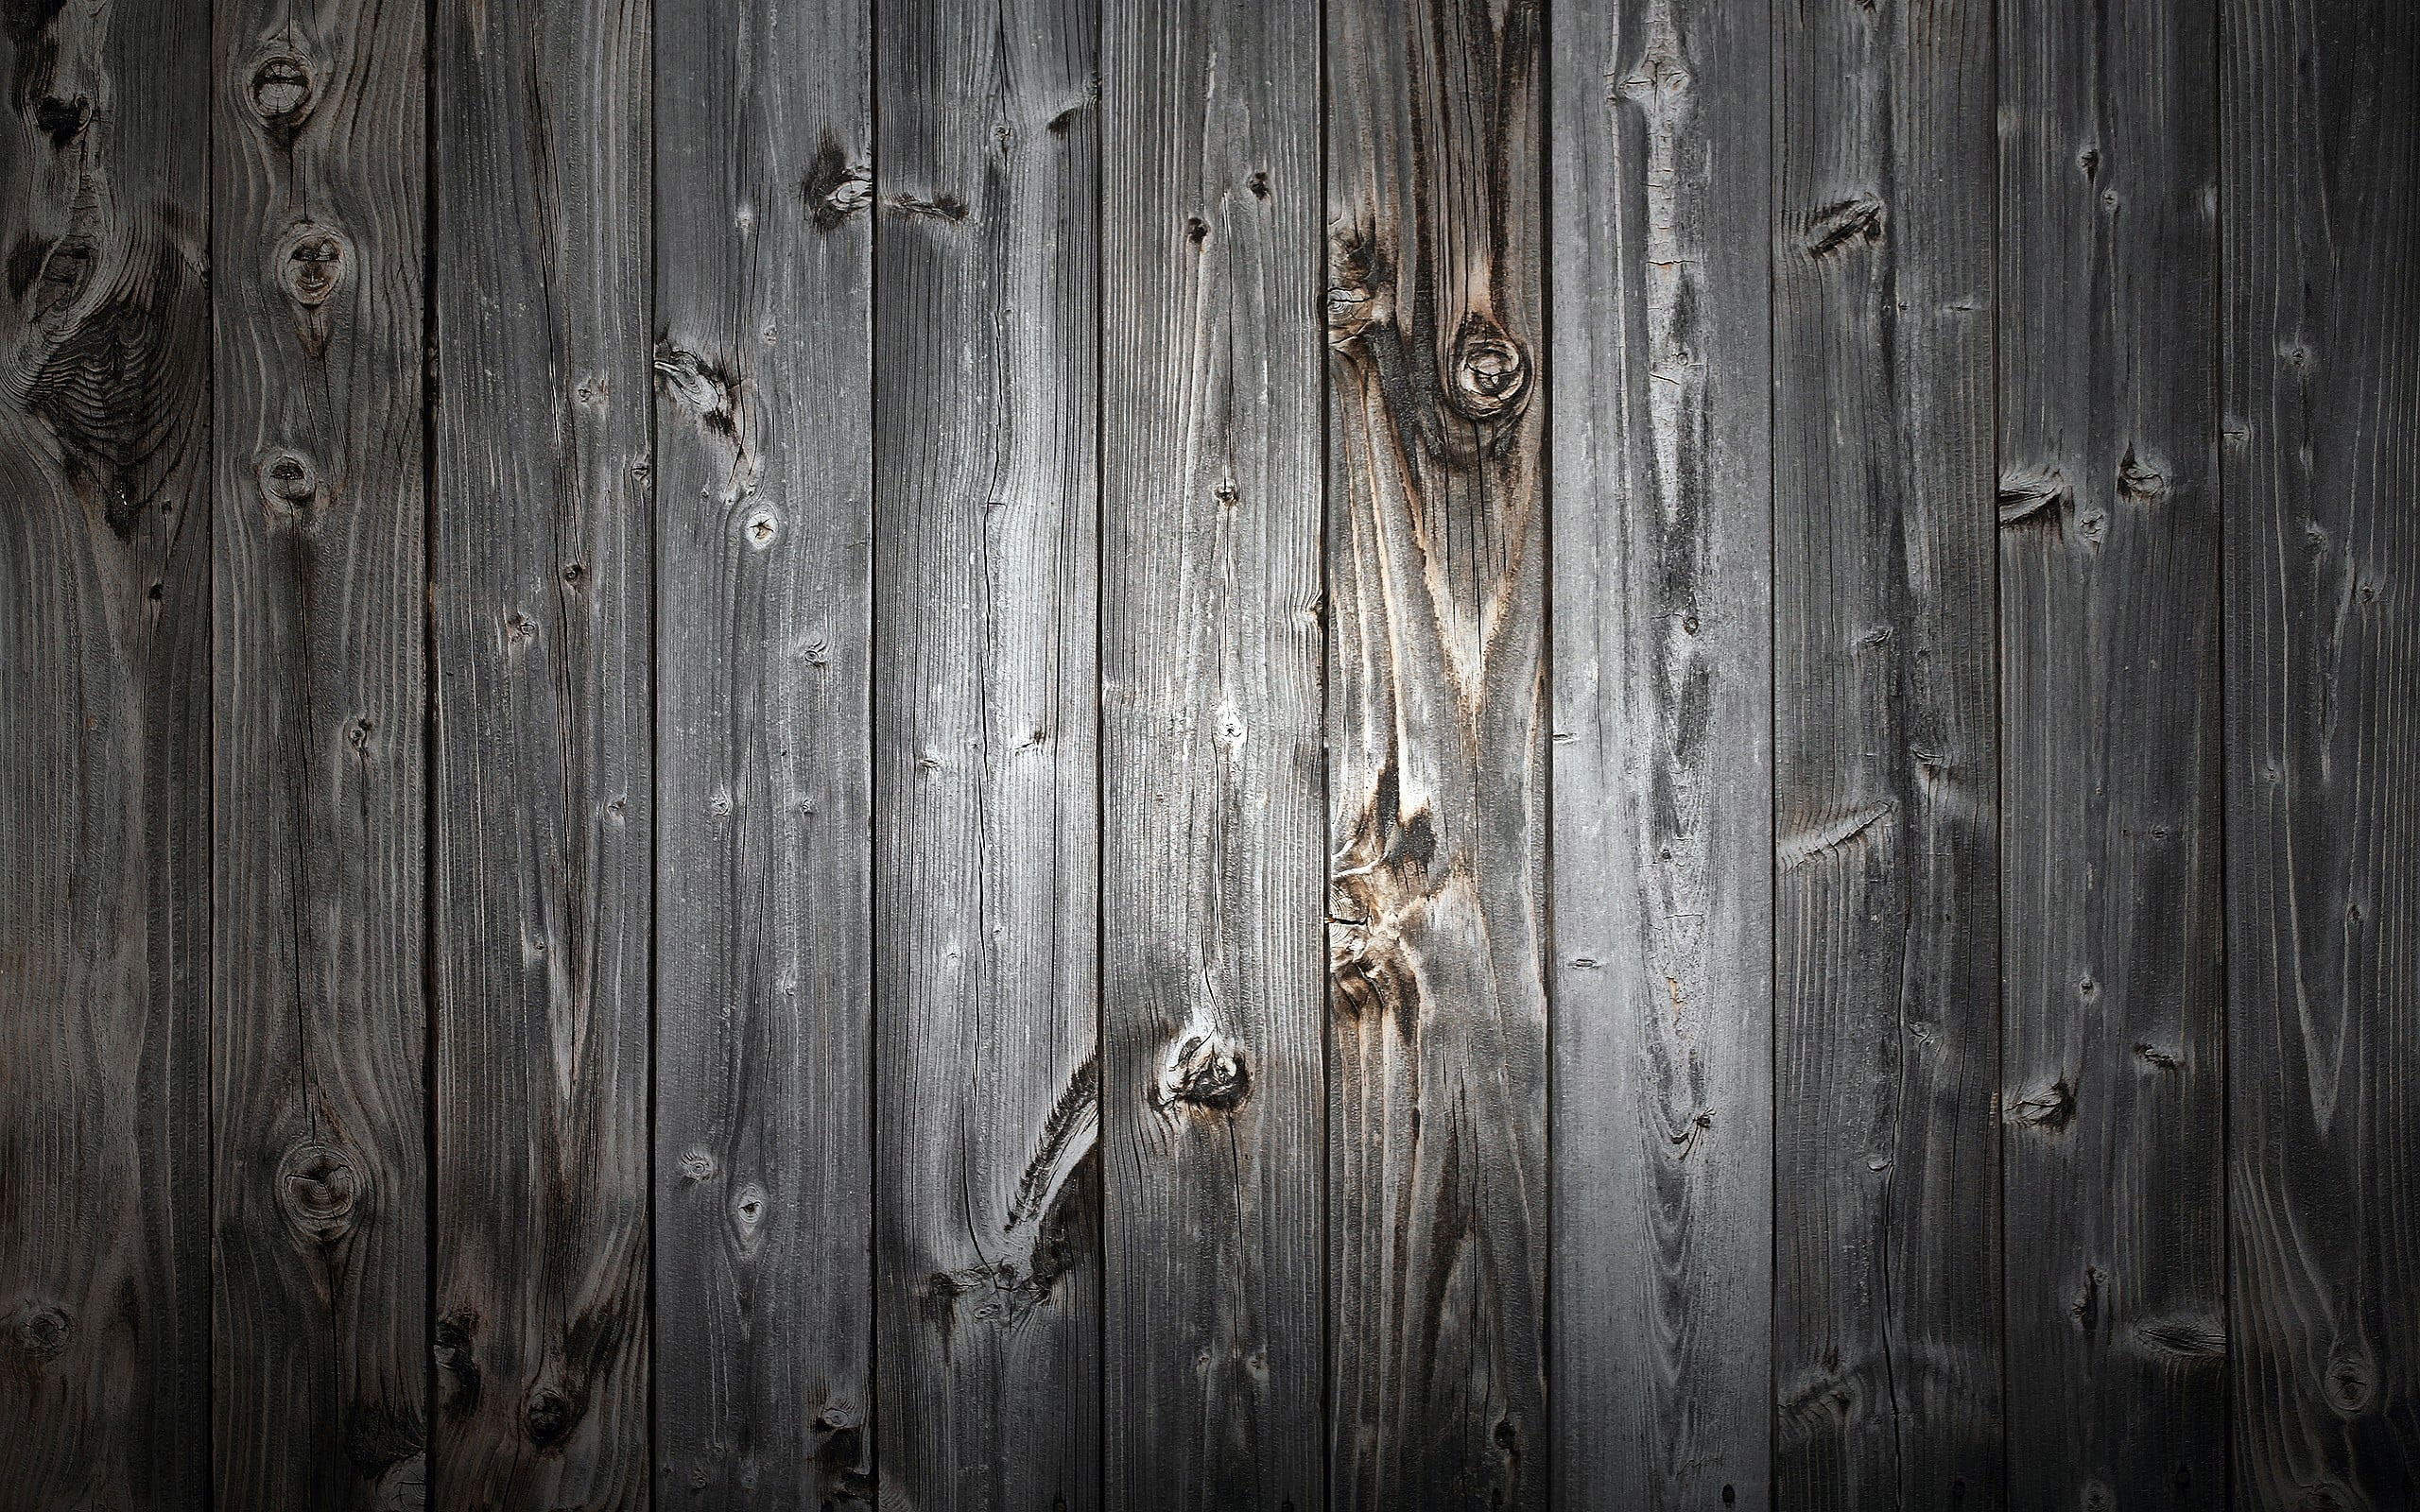 Gray wooden wallpaper, minimalism, wooden surface, planks, texture